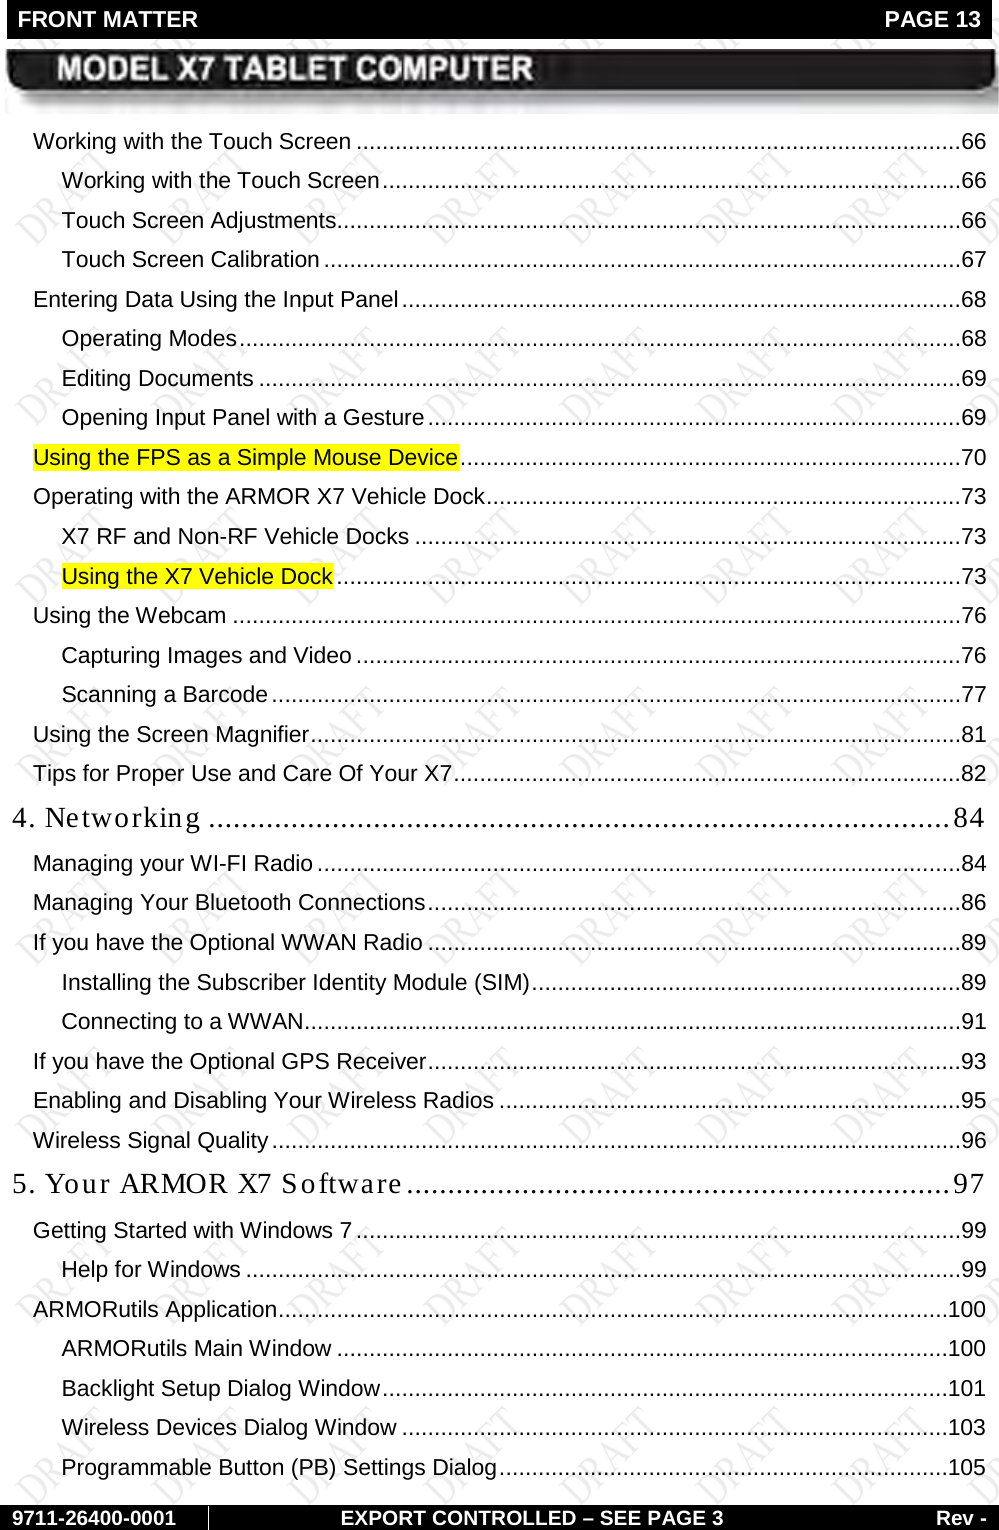 FRONT MATTER   PAGE 13        9711-26400-0001 EXPORT CONTROLLED – SEE PAGE 3 Rev - Working with the Touch Screen .............................................................................................66 Working with the Touch Screen .........................................................................................66 Touch Screen Adjustments................................................................................................66 Touch Screen Calibration ..................................................................................................67 Entering Data Using the Input Panel ......................................................................................68 Operating Modes ...............................................................................................................68 Editing Documents ............................................................................................................69 Opening Input Panel with a Gesture ..................................................................................69 Using the FPS as a Simple Mouse Device .............................................................................70 Operating with the ARMOR X7 Vehicle Dock .........................................................................73 X7 RF and Non-RF Vehicle Docks ....................................................................................73 Using the X7 Vehicle Dock ................................................................................................73 Using the Webcam ................................................................................................................76 Capturing Images and Video .............................................................................................76 Scanning a Barcode ..........................................................................................................77 Using the Screen Magnifier ....................................................................................................81 Tips for Proper Use and Care Of Your X7 ..............................................................................82 4. Networking .......................................................................................... 84 Managing your WI-FI Radio ...................................................................................................84 Managing Your Bluetooth Connections ..................................................................................86 If you have the Optional WWAN Radio ..................................................................................89 Installing the Subscriber Identity Module (SIM) ..................................................................89 Connecting to a WWAN .....................................................................................................91 If you have the Optional GPS Receiver ..................................................................................93 Enabling and Disabling Your Wireless Radios .......................................................................95 Wireless Signal Quality ..........................................................................................................96 5. Your ARMOR X7 Software .................................................................. 97 Getting Started with Windows 7 .............................................................................................99 Help for Windows ..............................................................................................................99 ARMORutils Application ....................................................................................................... 100 ARMORutils Main Window .............................................................................................. 100 Backlight Setup Dialog Window ....................................................................................... 101 Wireless Devices Dialog Window .................................................................................... 103 Programmable Button (PB) Settings Dialog ..................................................................... 105 